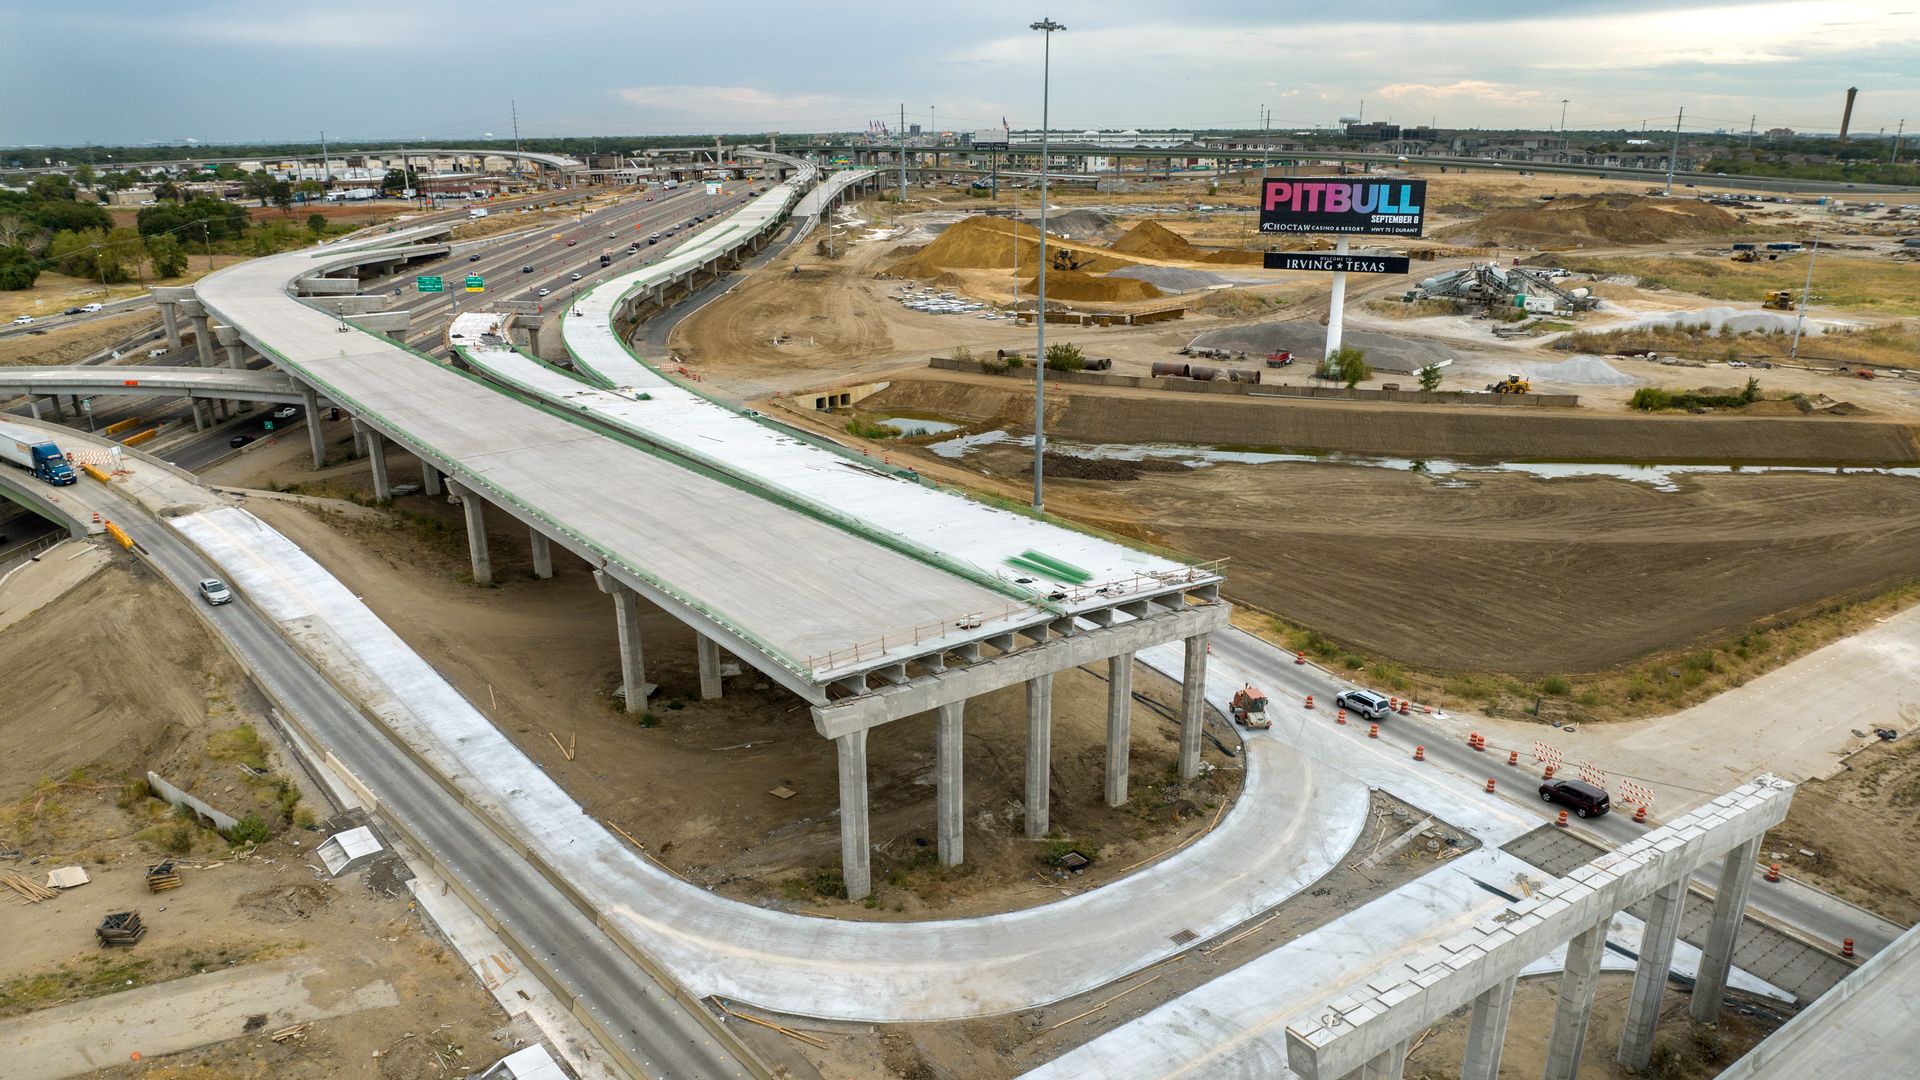 A new interchange is being built on the site of the former Dallas Cowboys stadium in Irving, Texas. Photo: John Moore/Getty Images